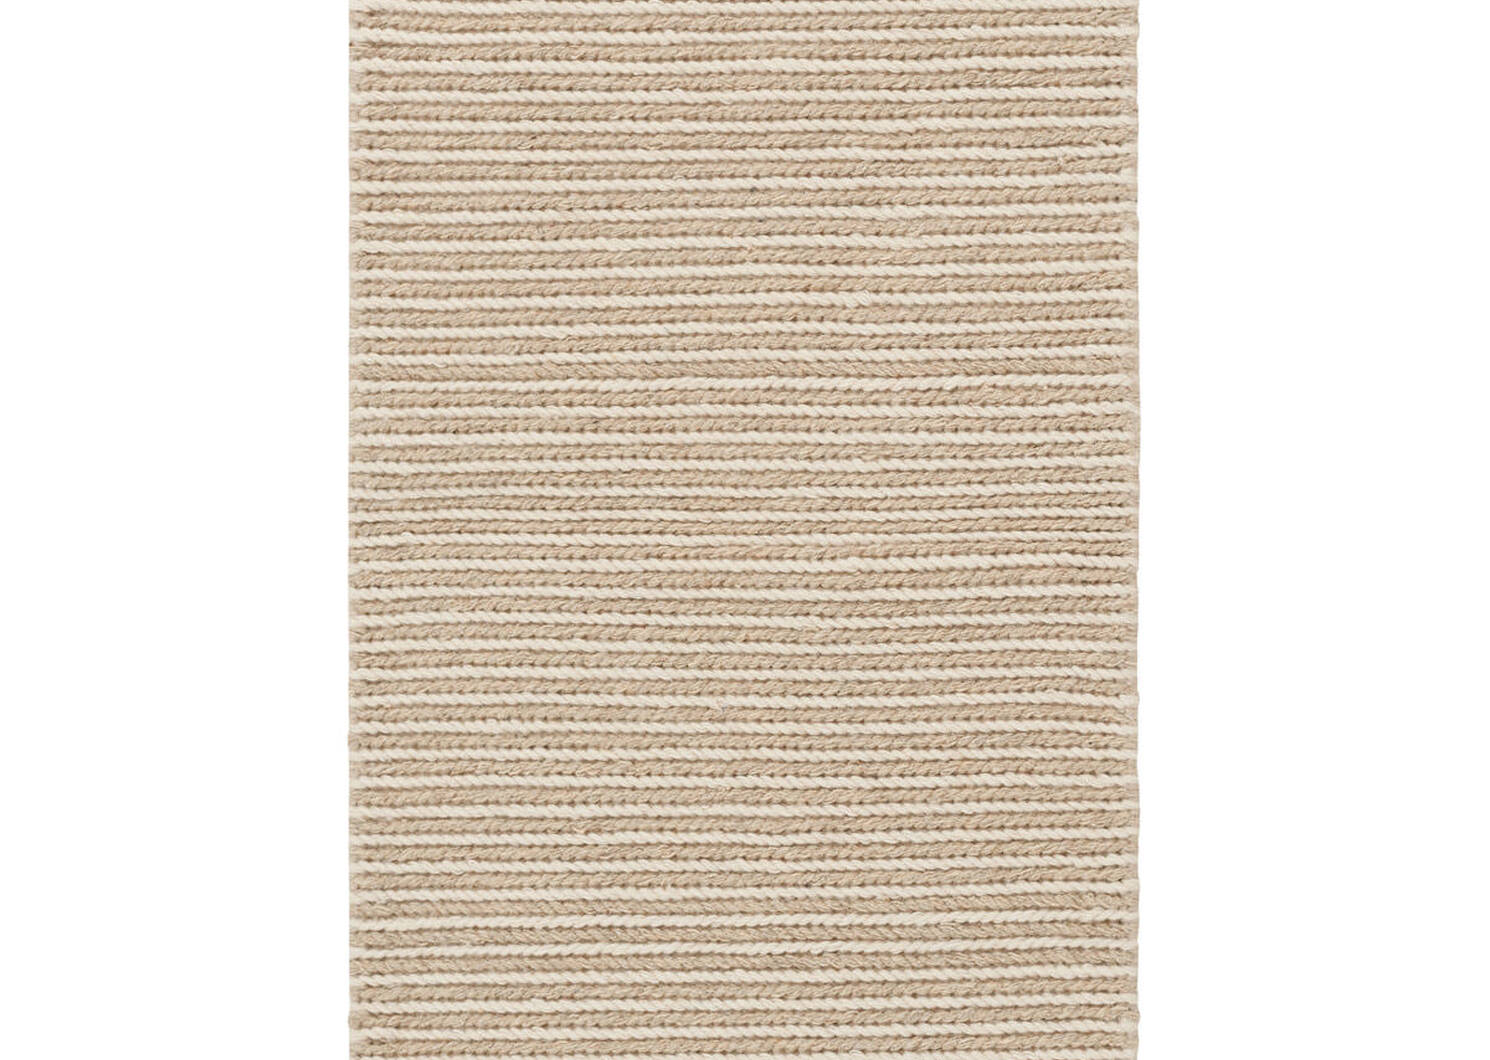 Pax Accent Rug - Natural